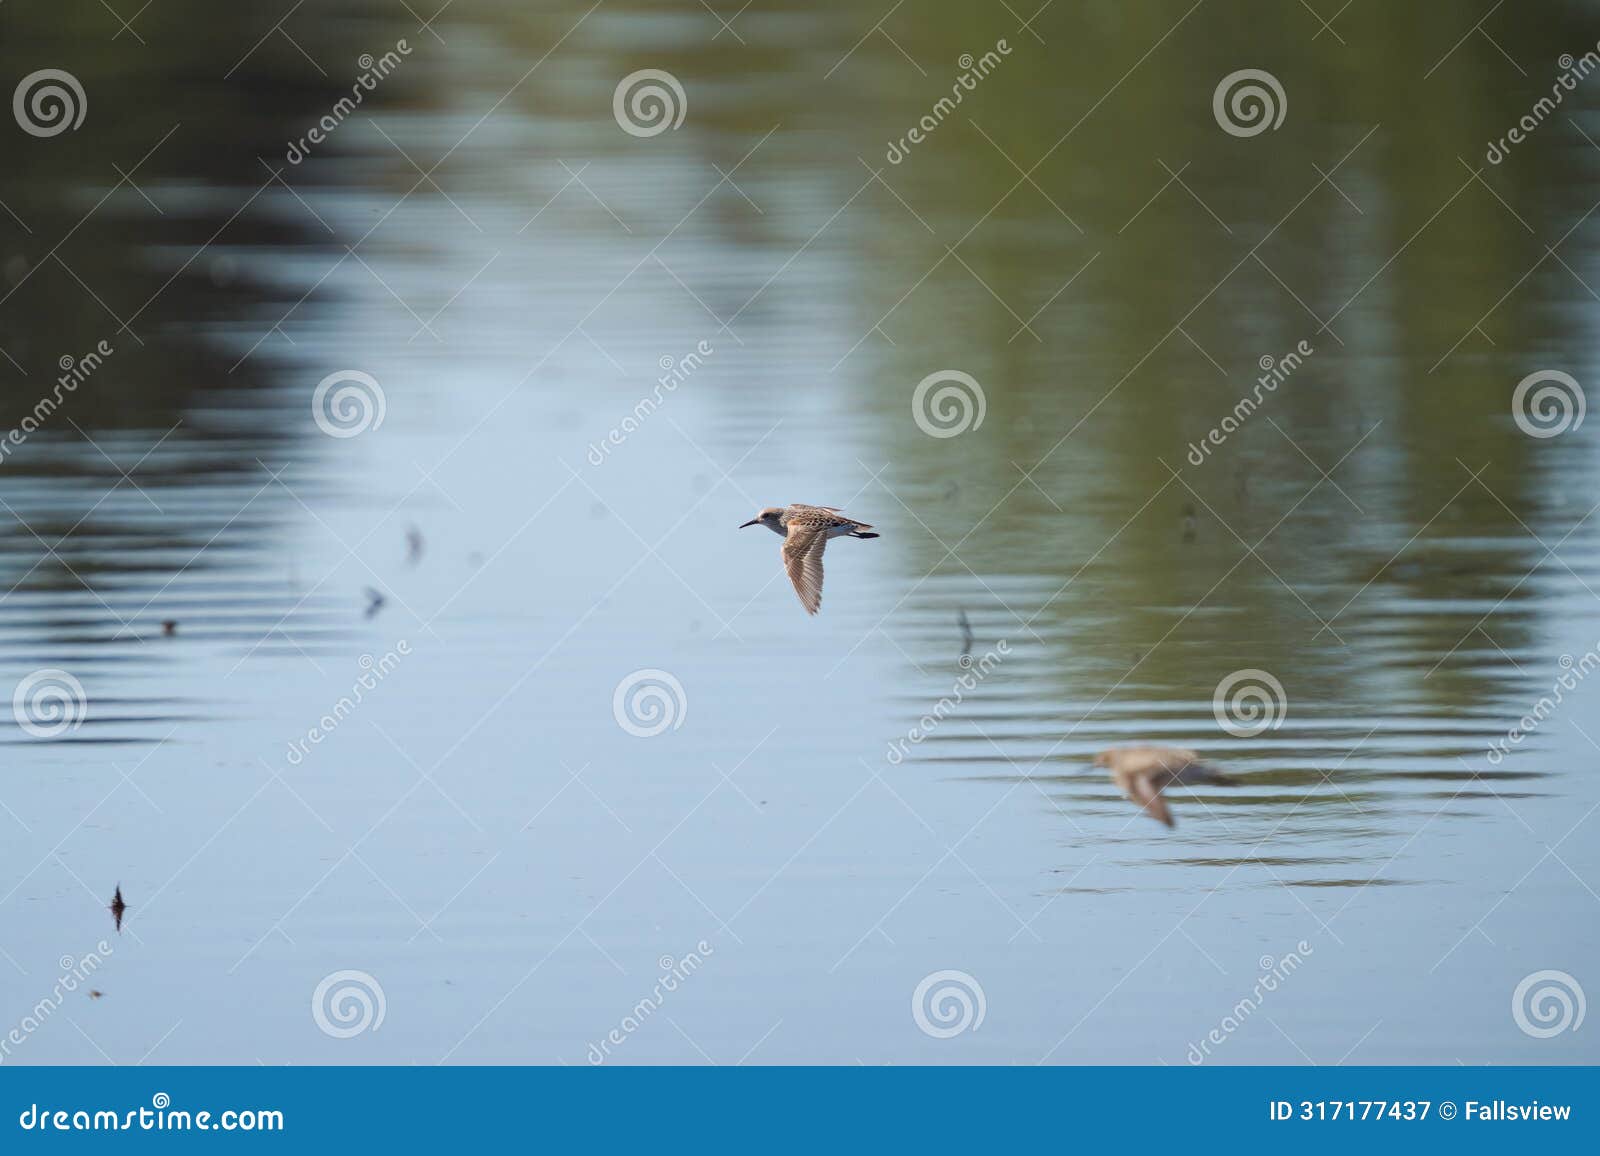 western sandpiper flying at lakeside